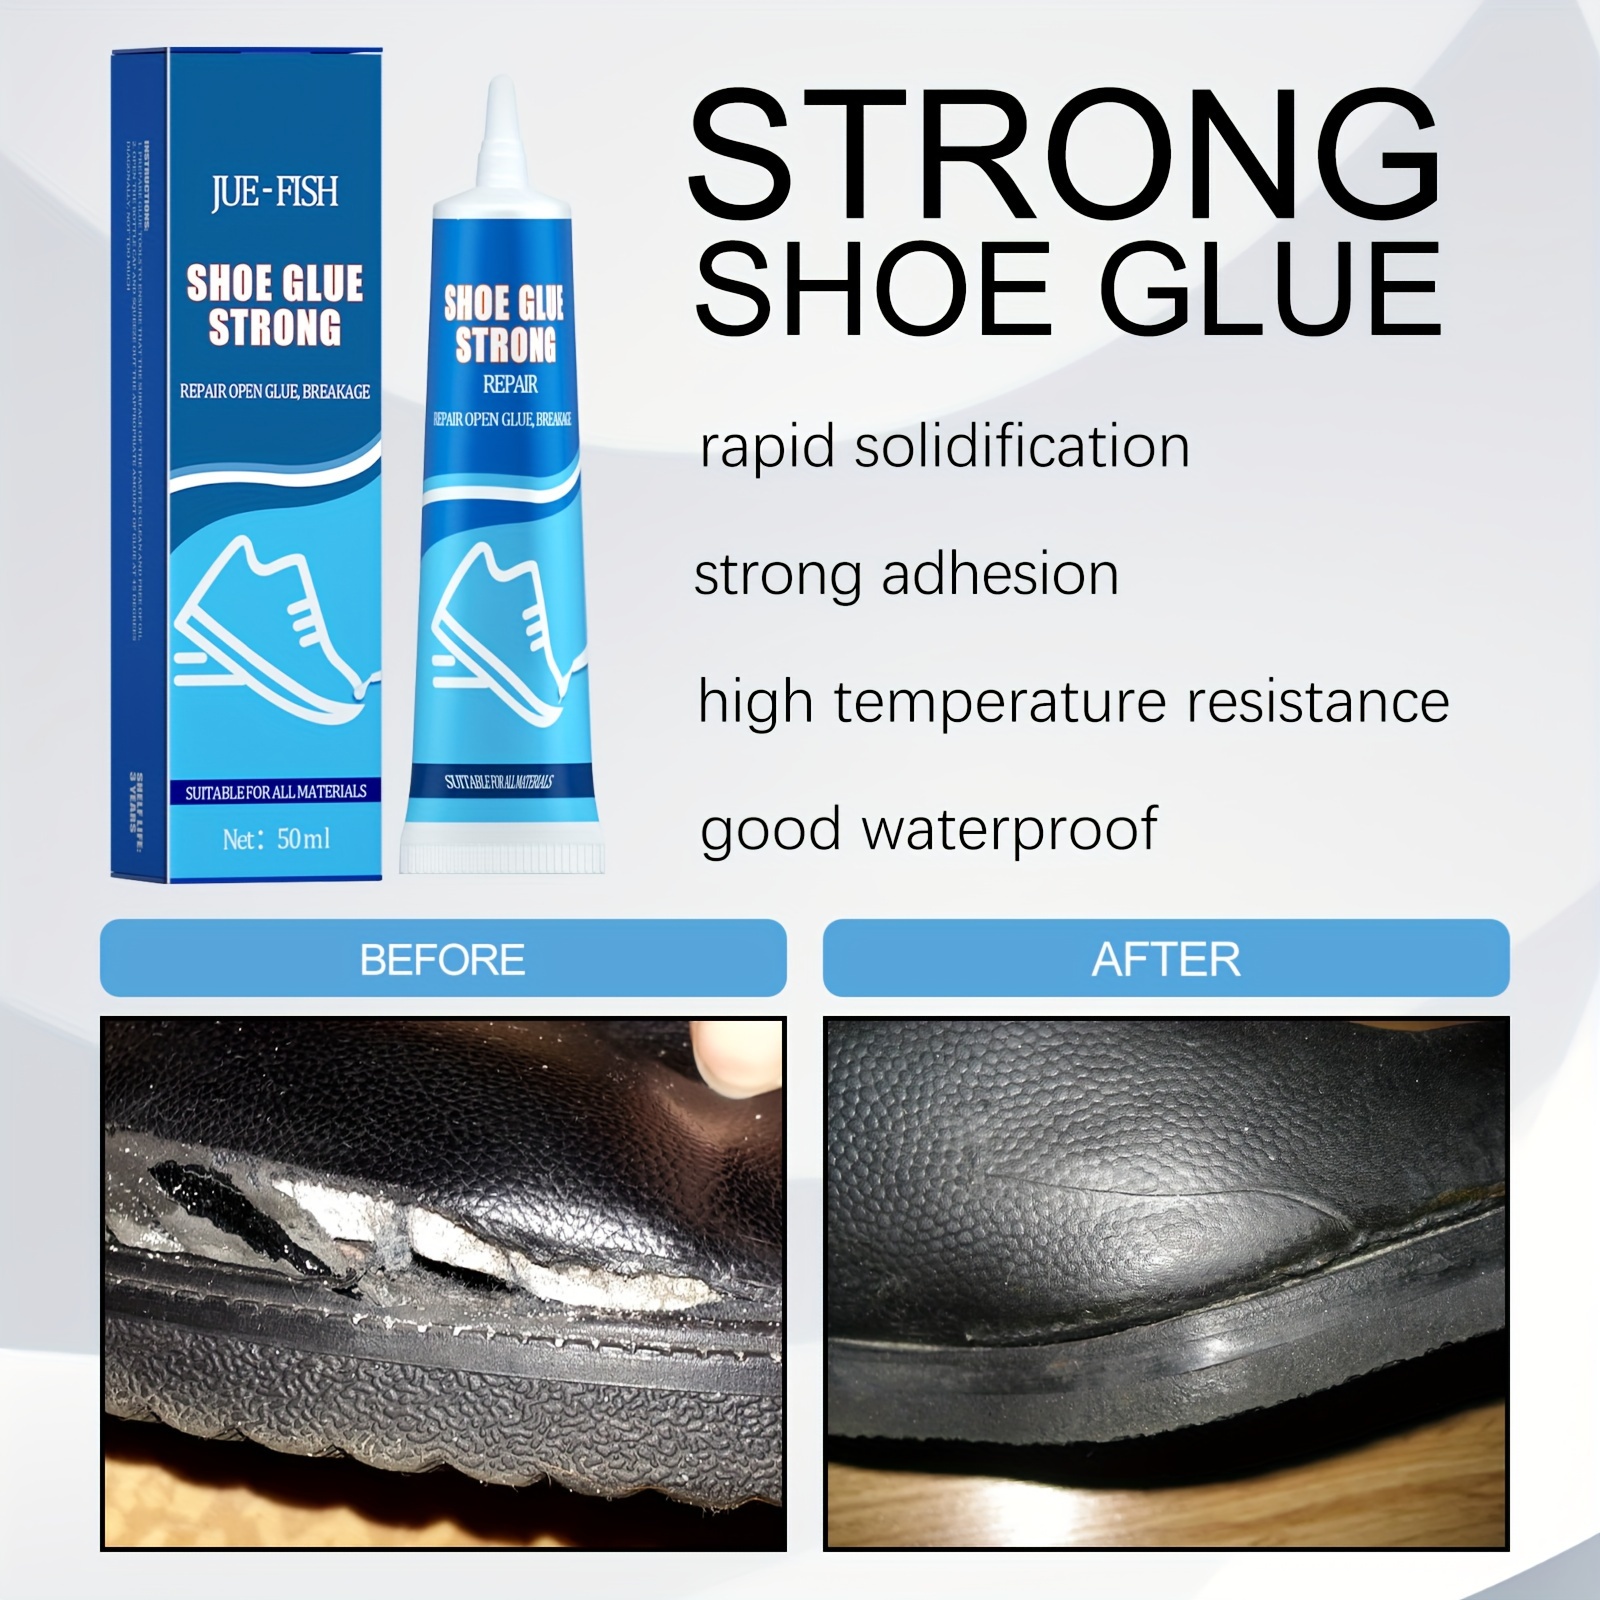 60ML Shoe Glue Sole Repair, Instant Professional Grade Shoe Repair Glue,  Slow-Drying Transparent Shoe Repair Glue Kit, Waterproof, Non-Hardening  Adhesive For Fixing Worn Shoes Or Boots, Clear